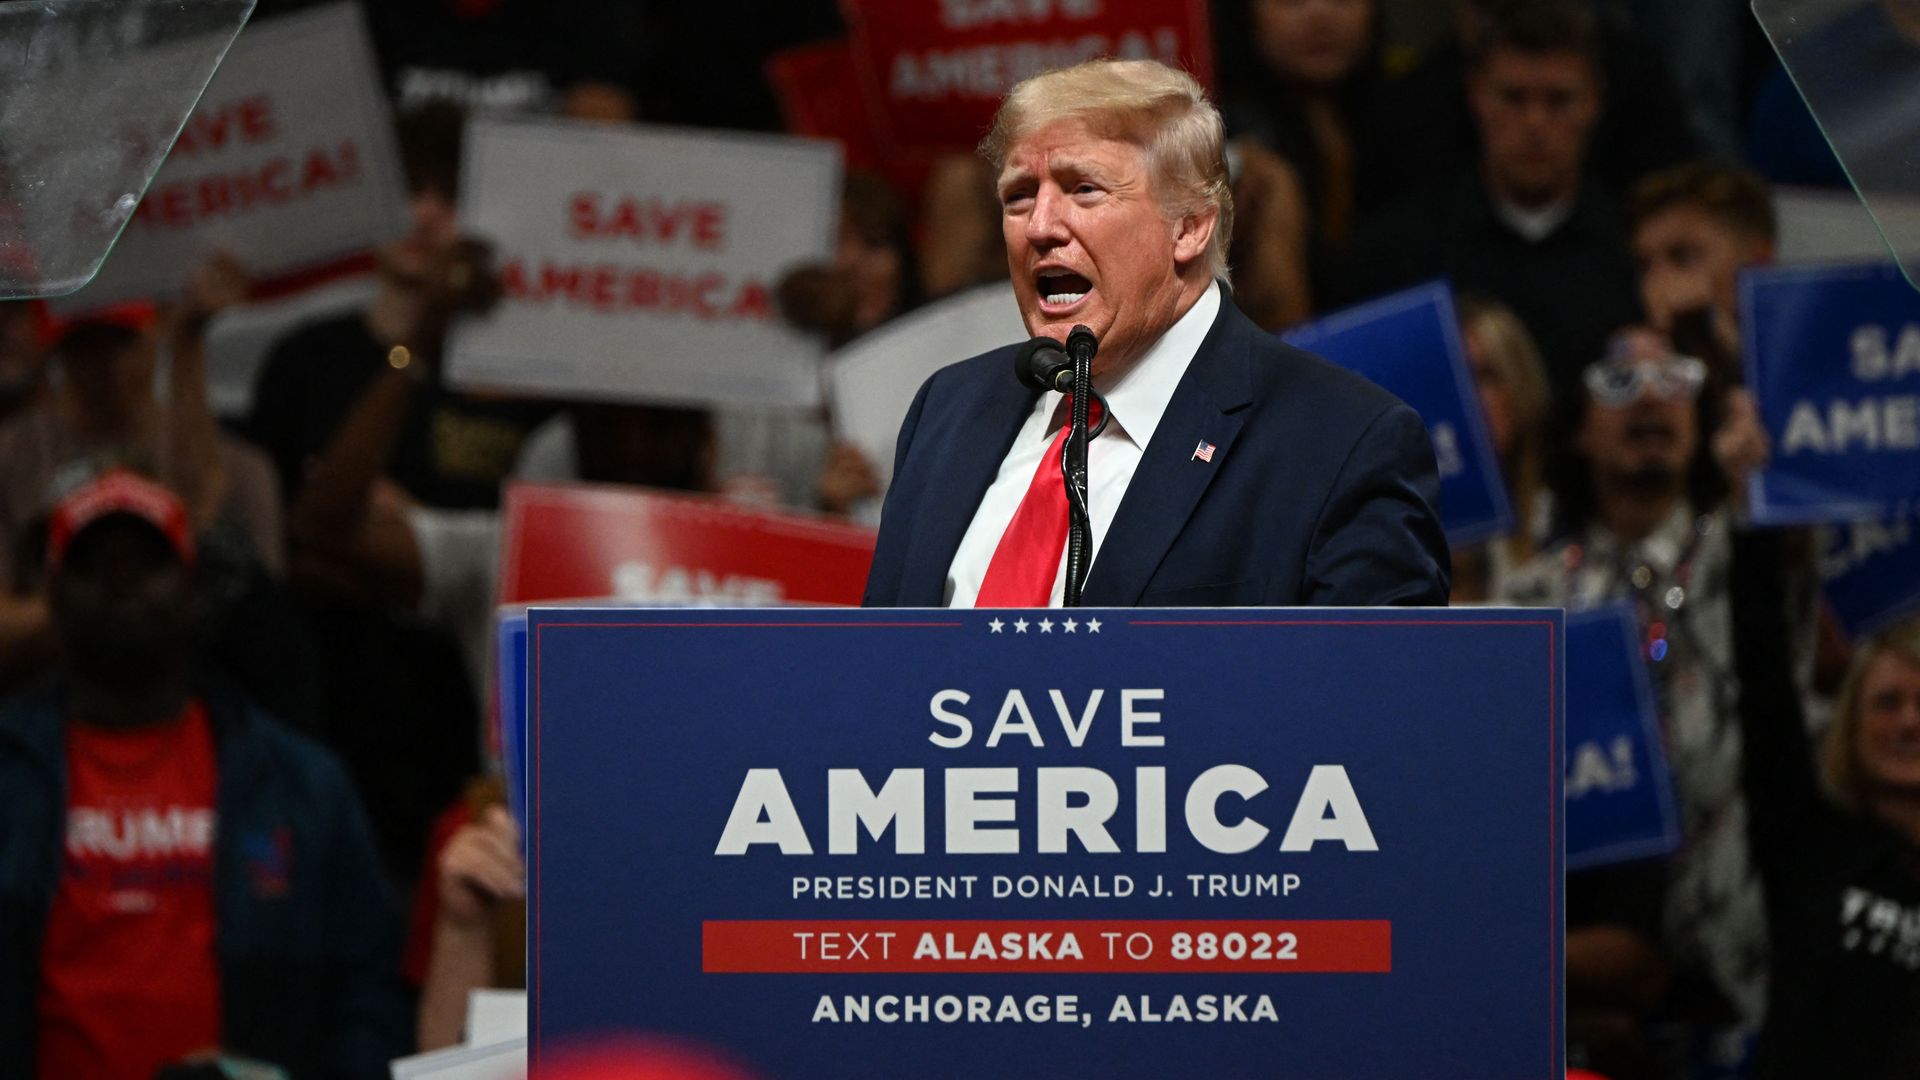 Donald Trump speaks during a "Save America" in Anchorage, Alaska on July 9